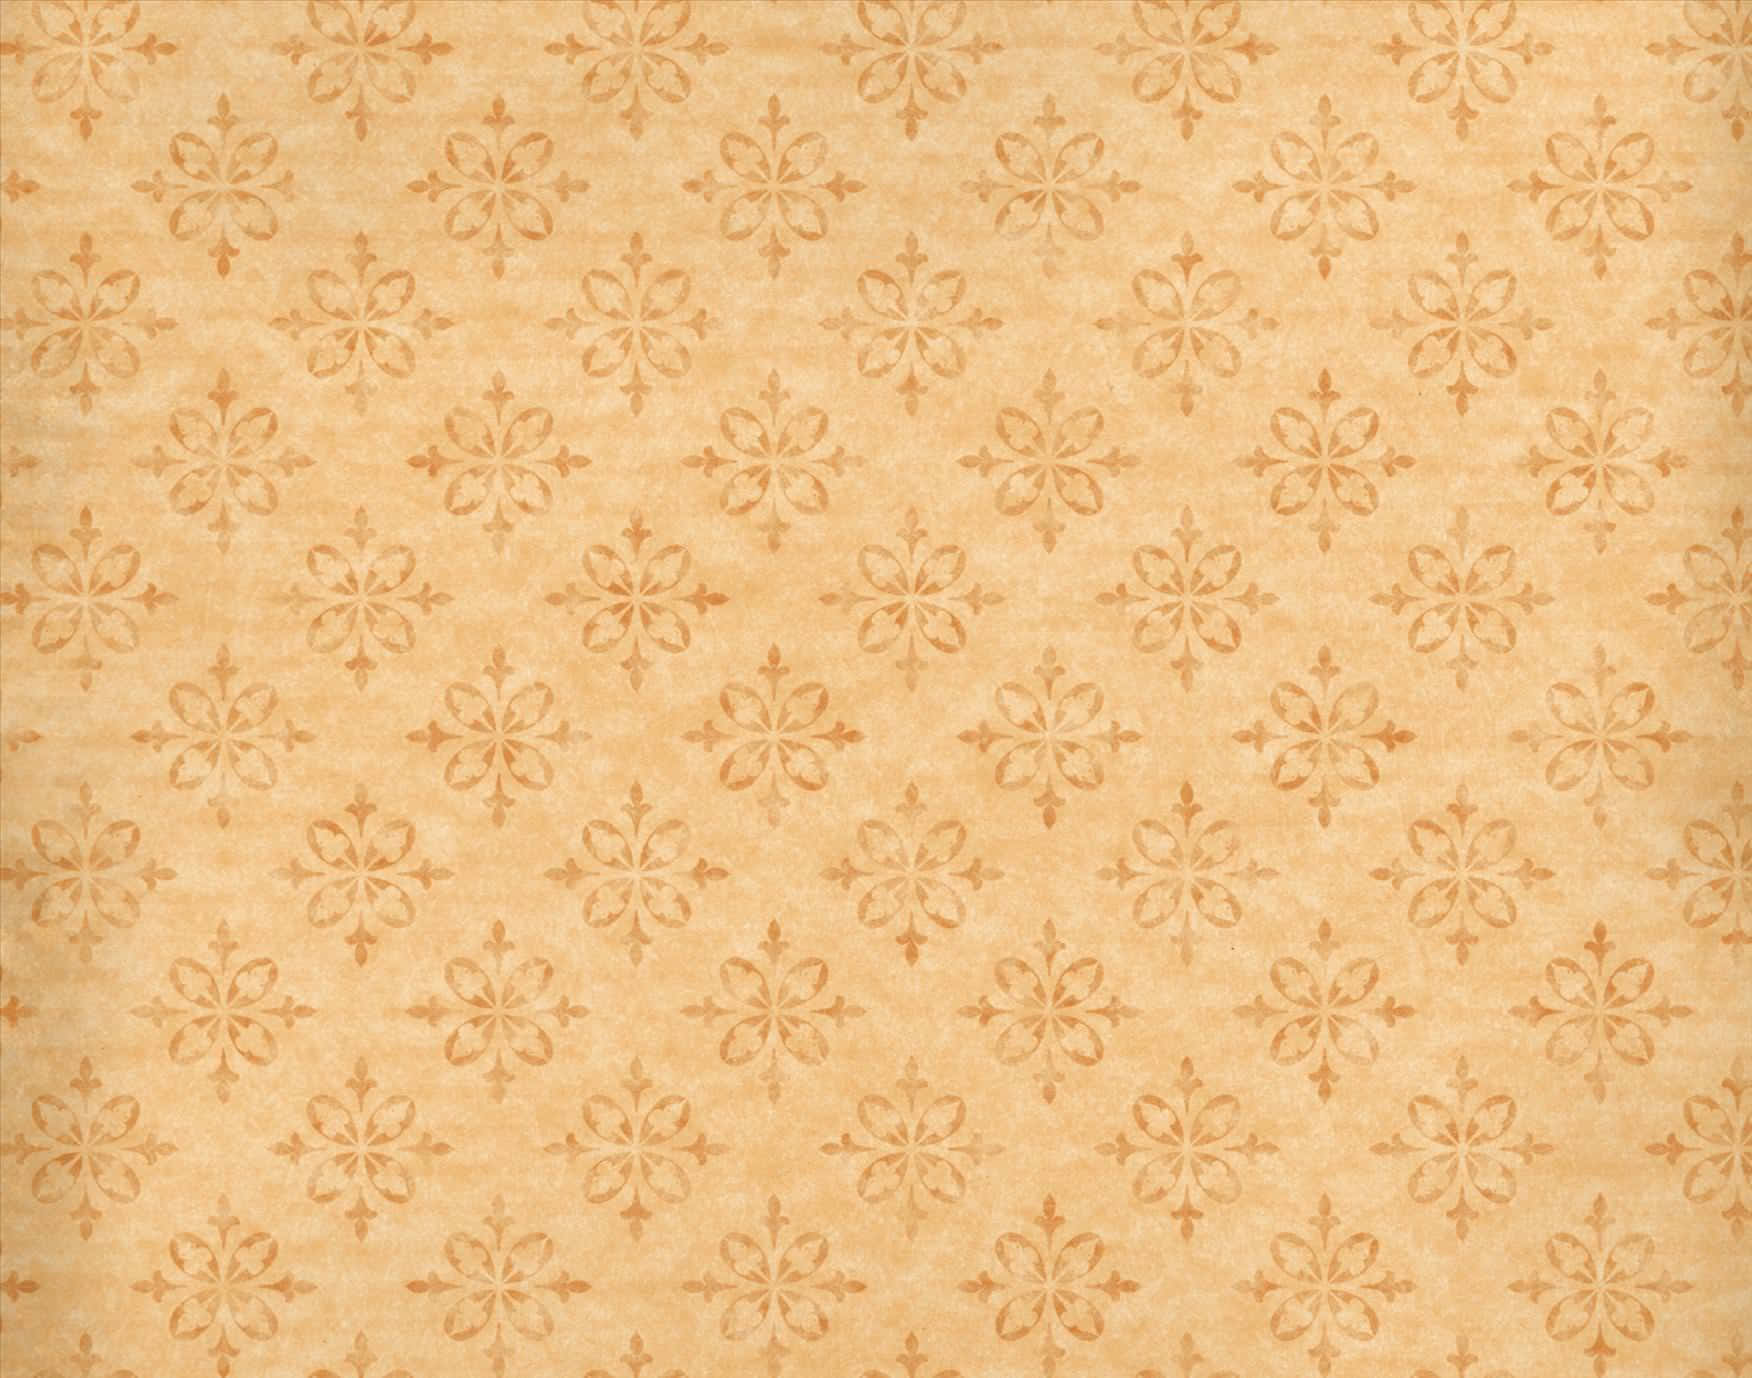 A serene, relaxing light brown background